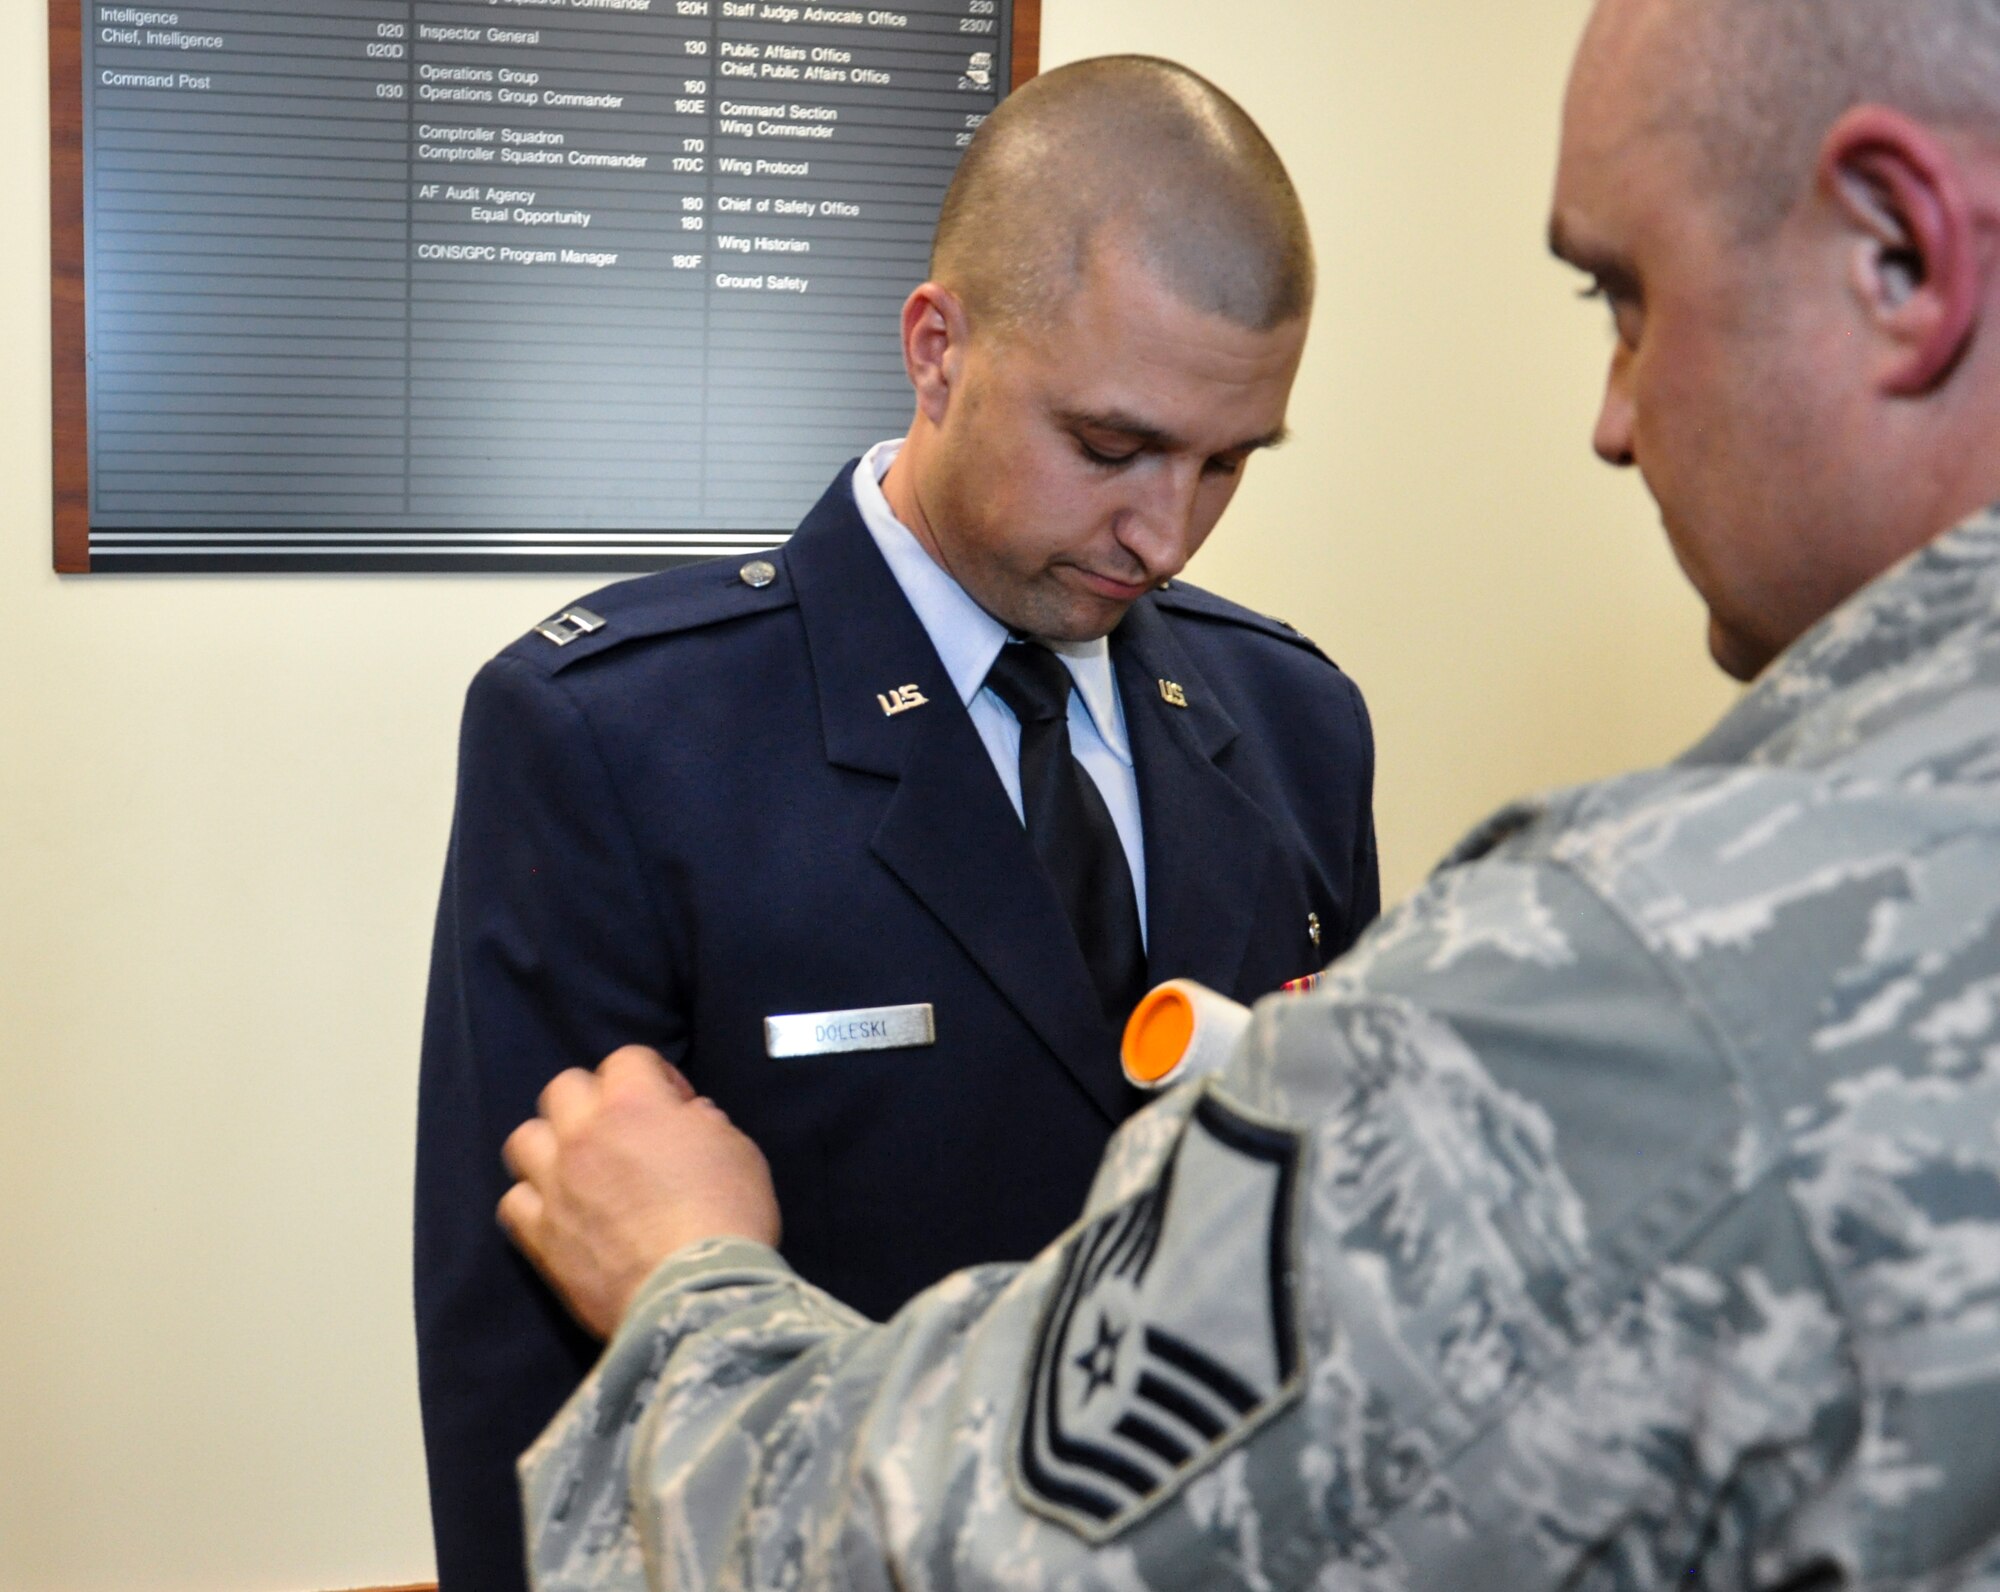 Master Sgt. Jody Brown, 460th Medical Group, right, helps prepare Capt. John Doleski, 460th MDG company grade officer category annual award nominee, uniform before meeting the annual award board Jan. 27, 2014, at the 460th Space Wing headquarters building on Buckley Air Force Base, Colo. All competitors met the annual awards board as part of their overall submission packages. (U.S. Air Force photo by Staff Sgt. Nicholas Rau/Released)